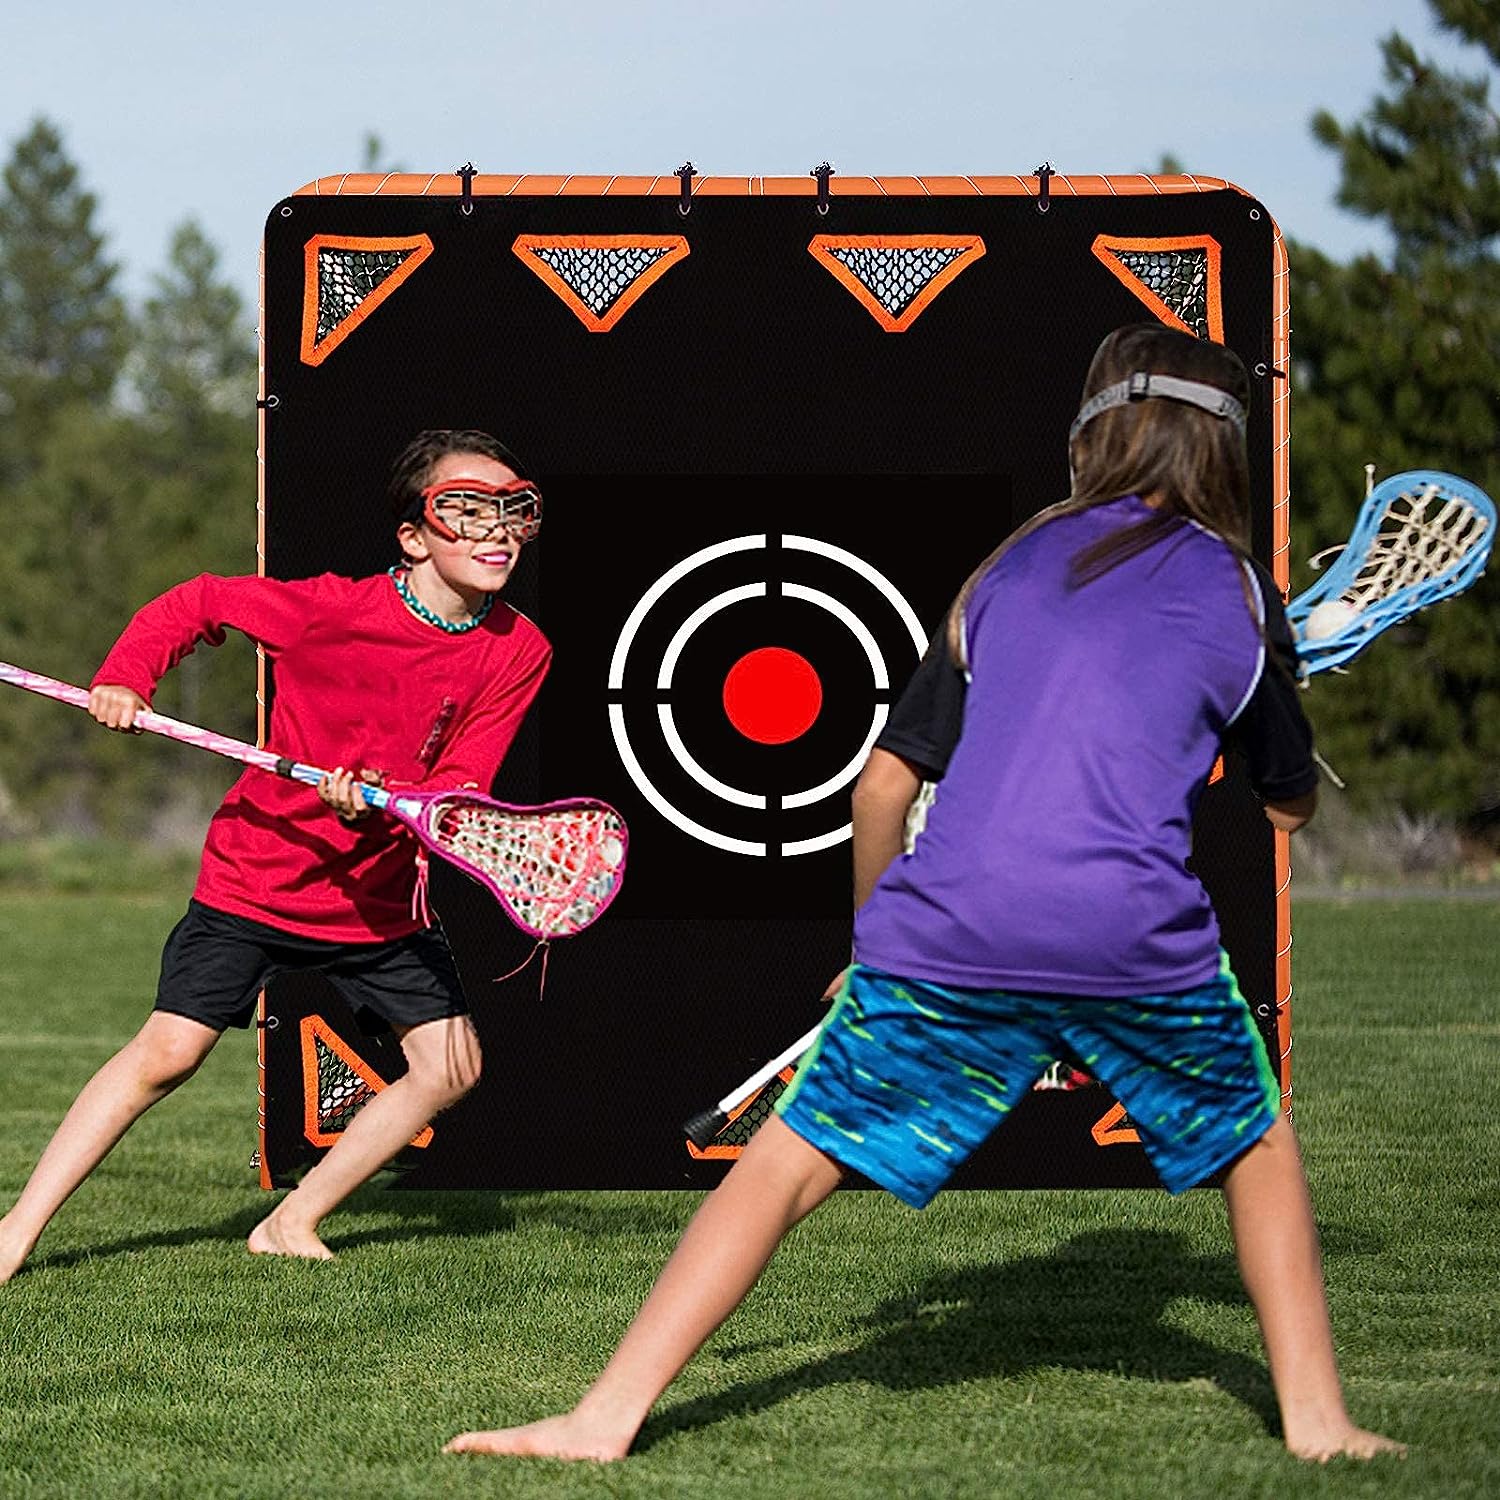 Portable Lacrosse Goal,Lacrosse Net with Steel Frame,6'X6' Lacrosse Goal Target,Lacrosse Target for Shooting,Collegiate Lacrosse Goals,Replacement Target for Lacrosse Goal